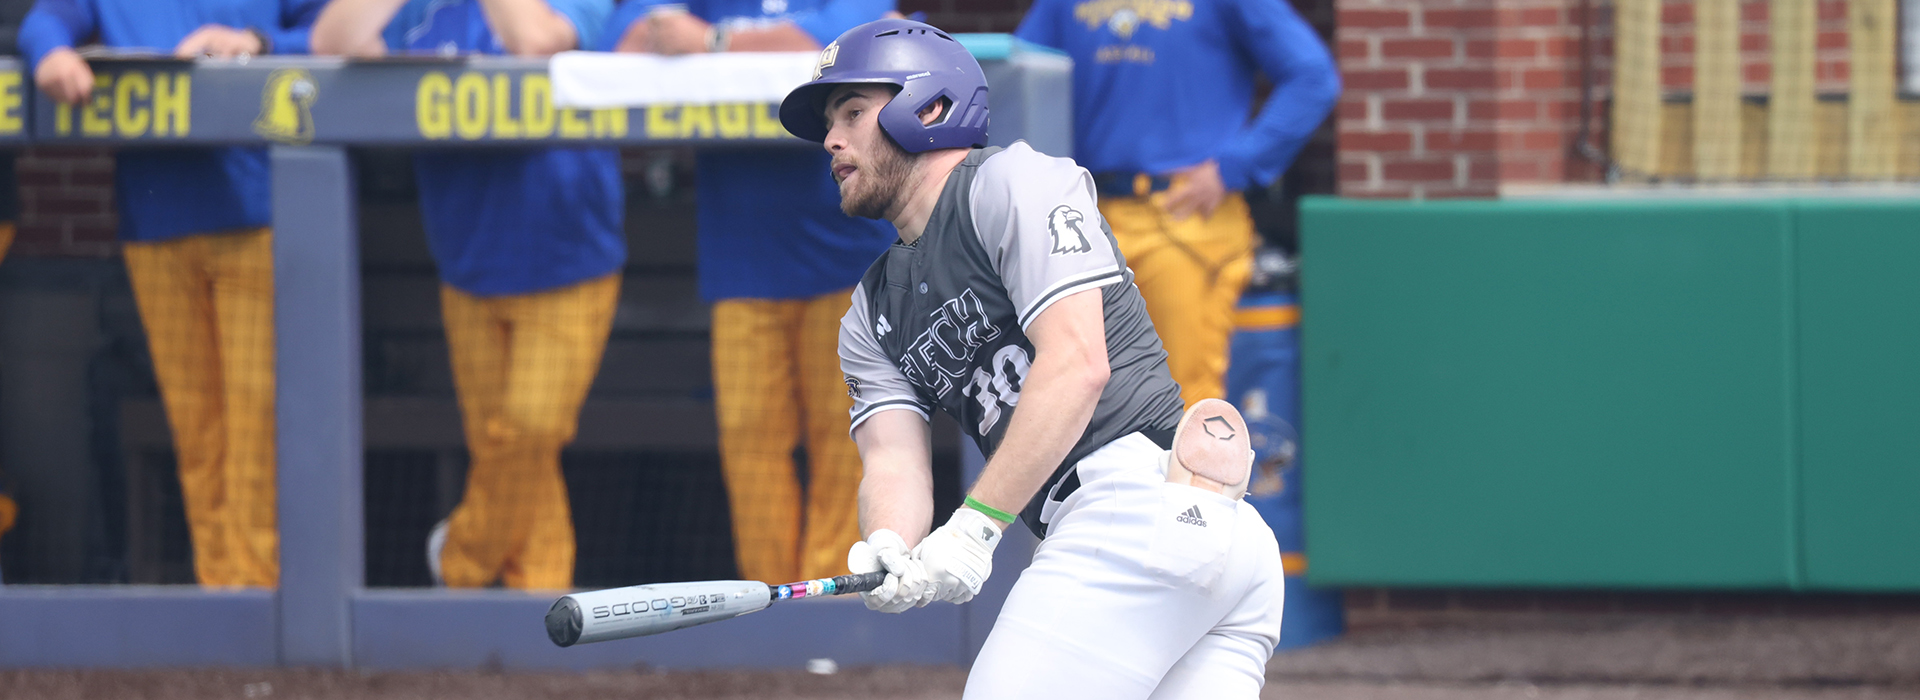 Lions top Golden Eagles to avoid weekend sweep